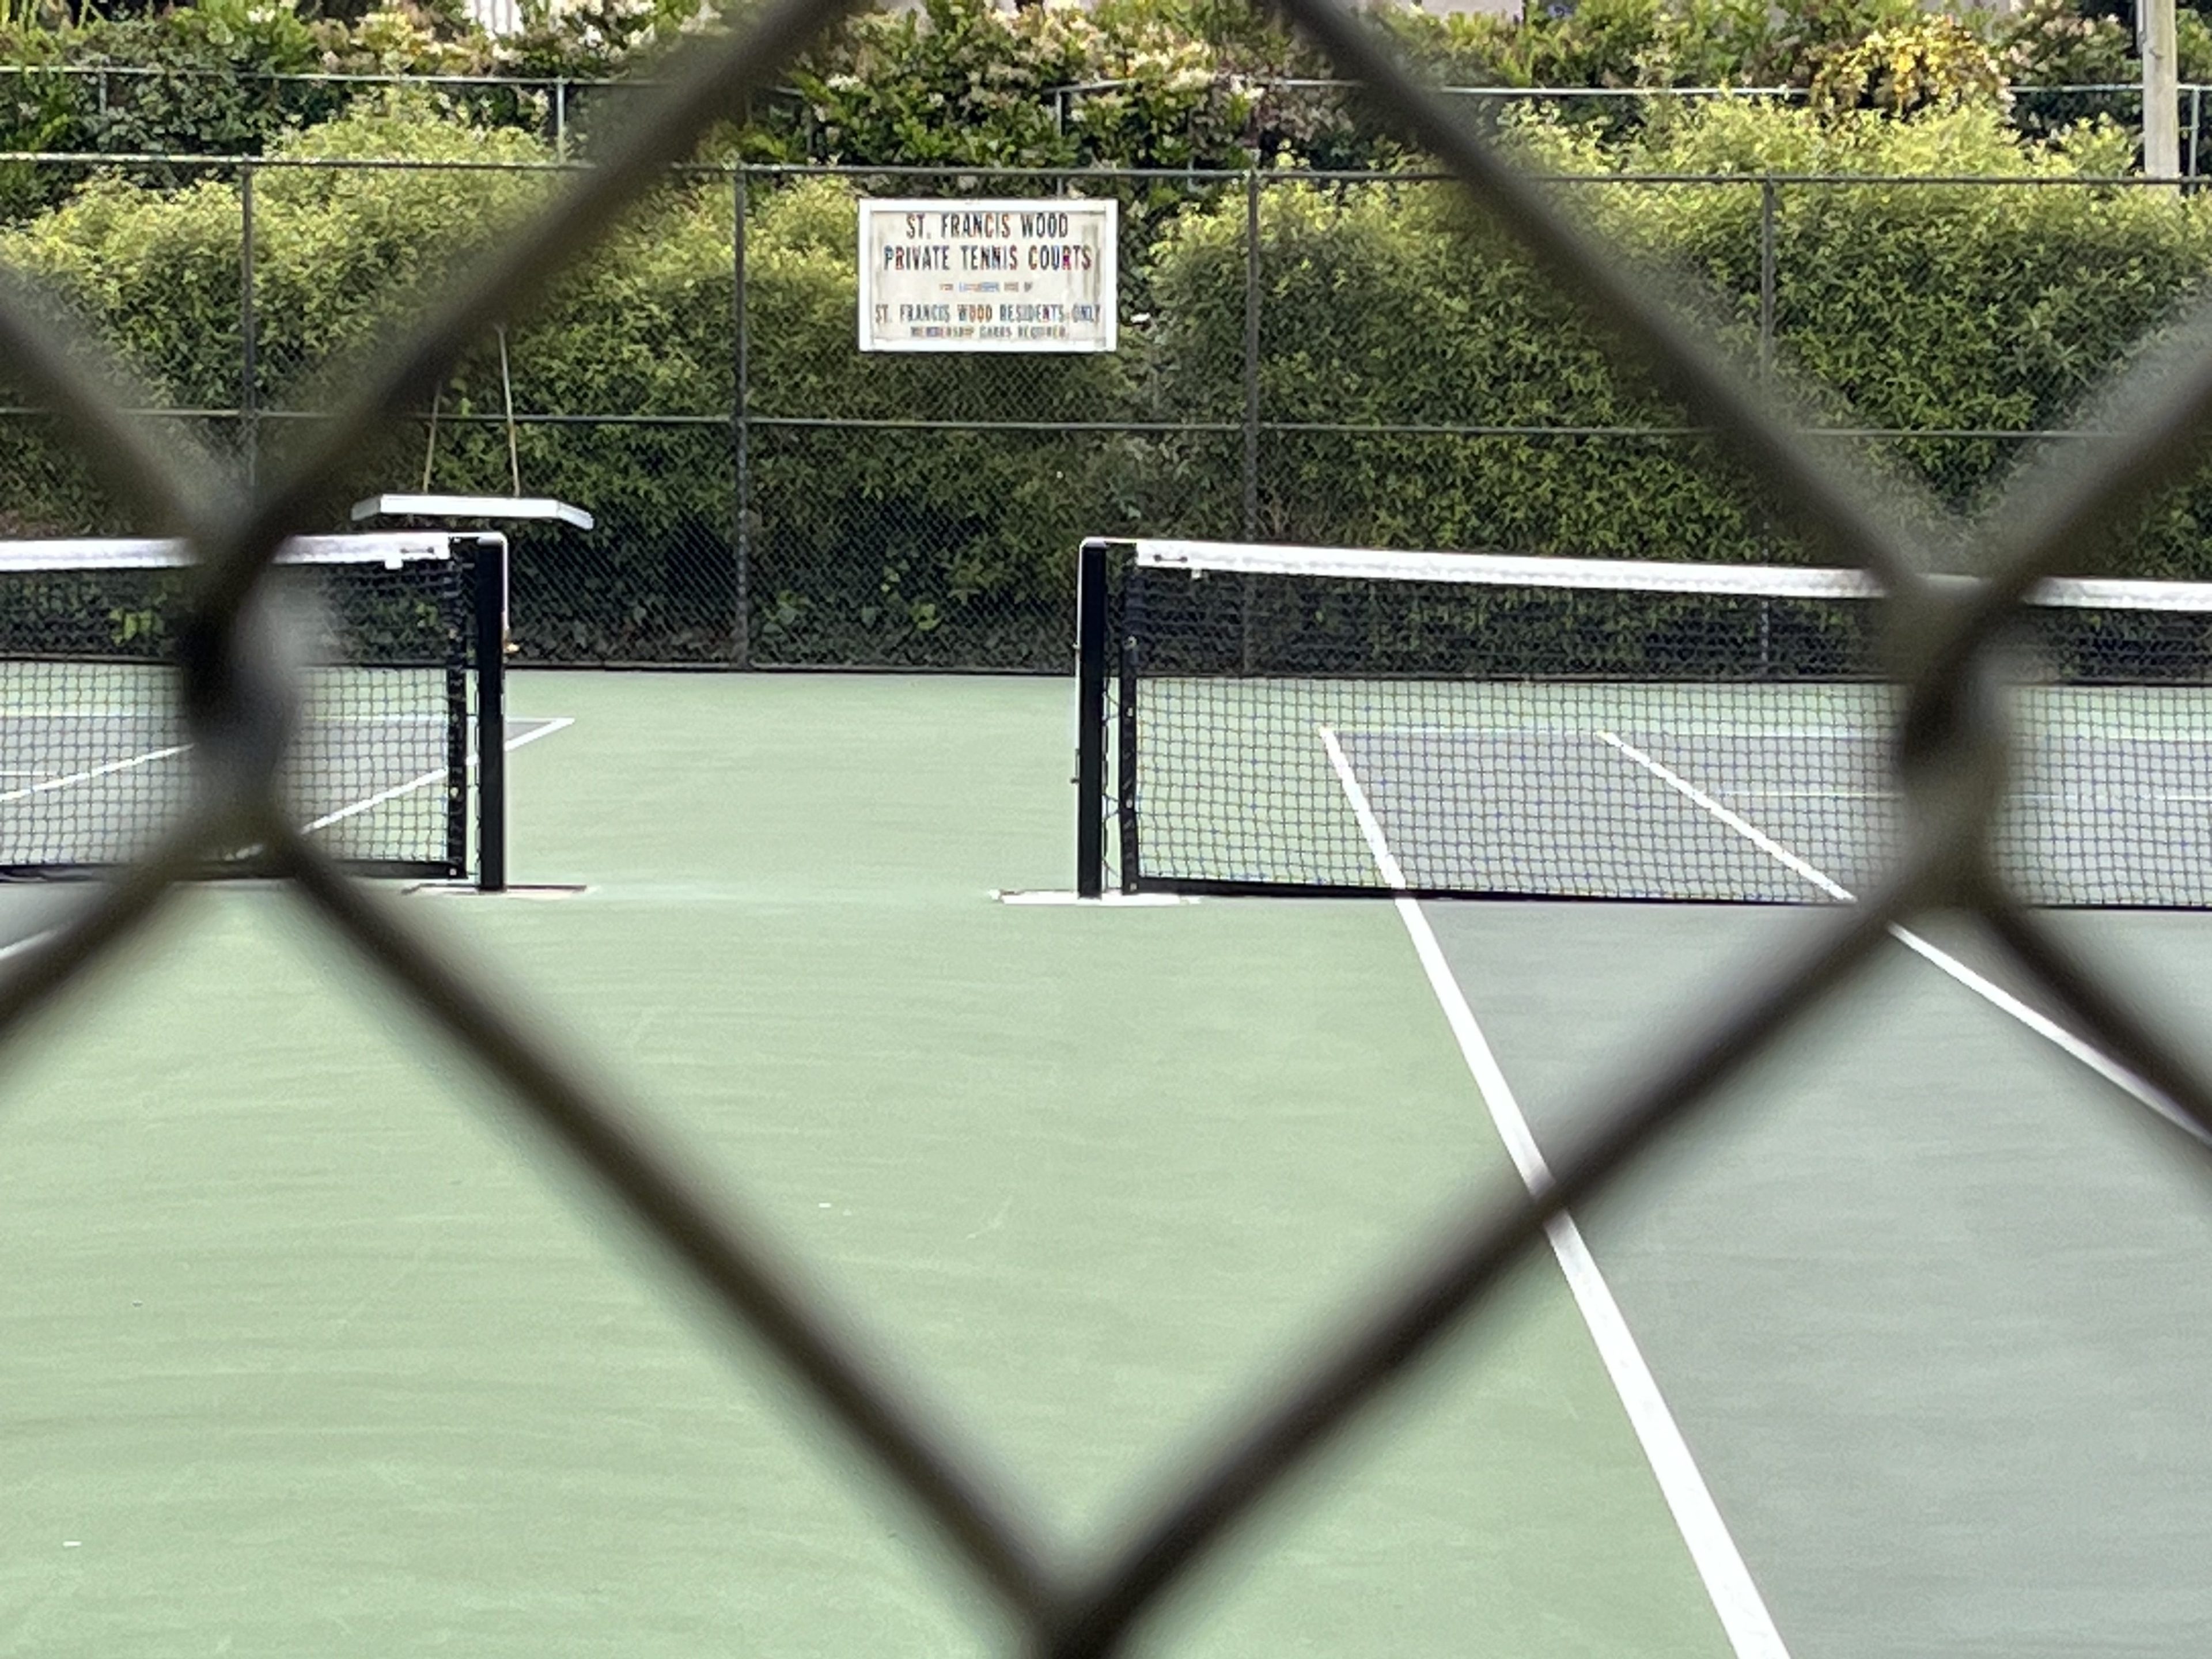 Posh San Francisco Enclave Enters Pickleball Cold War as Anonymous Fliers Dropped